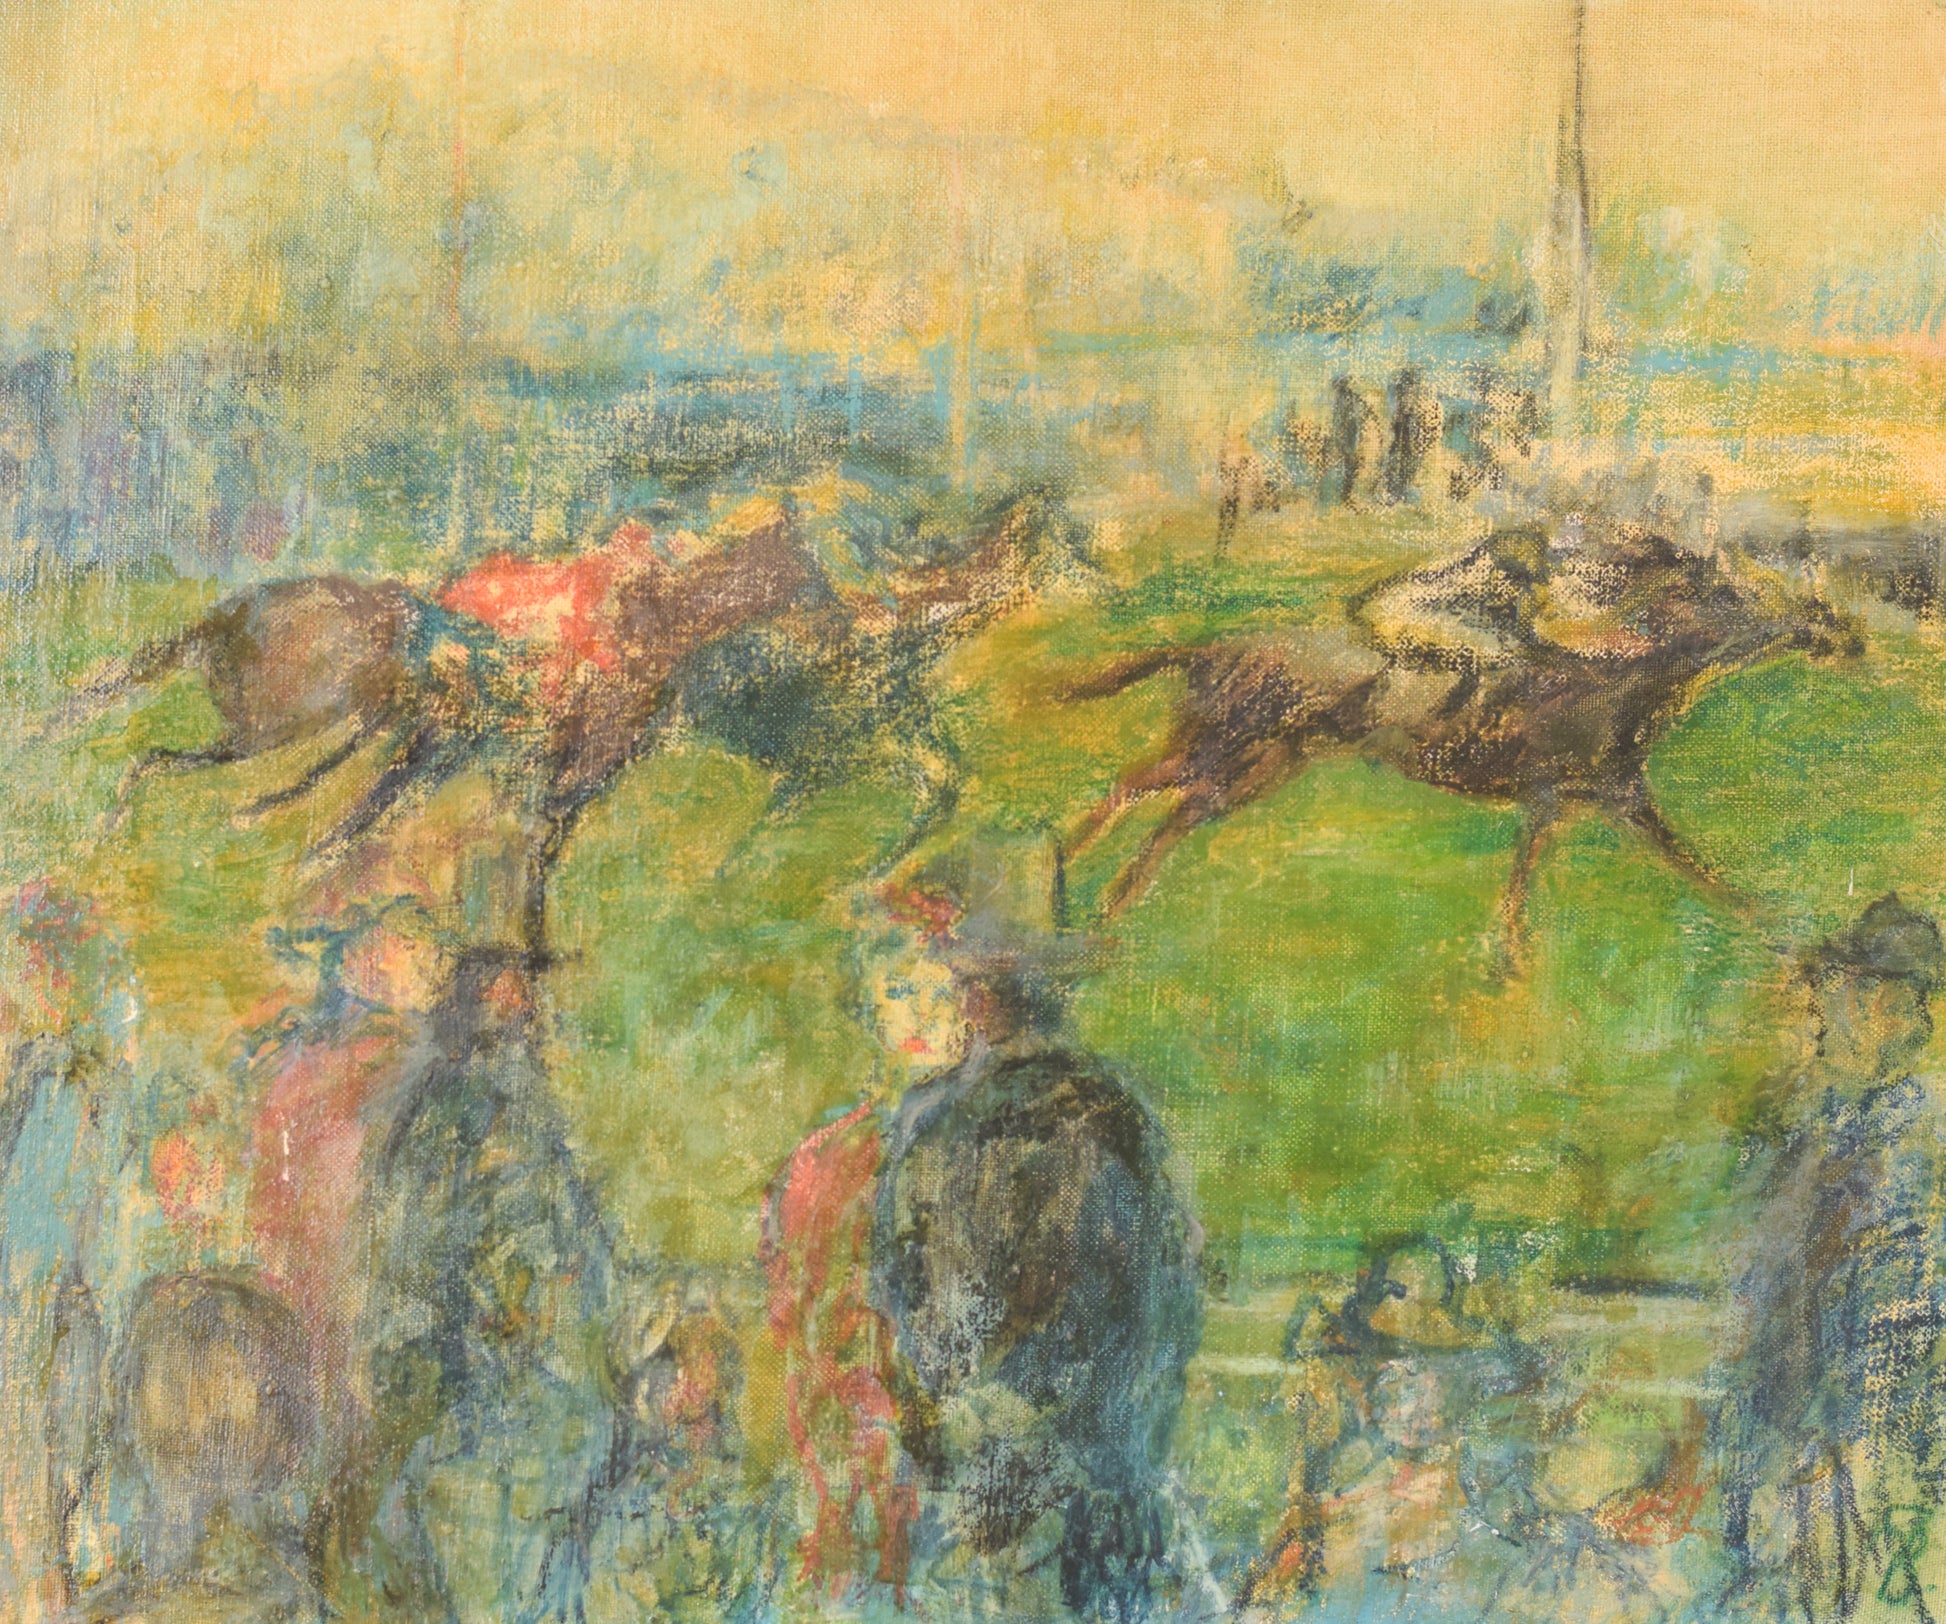 'A Day at the Races' Oil on canvas